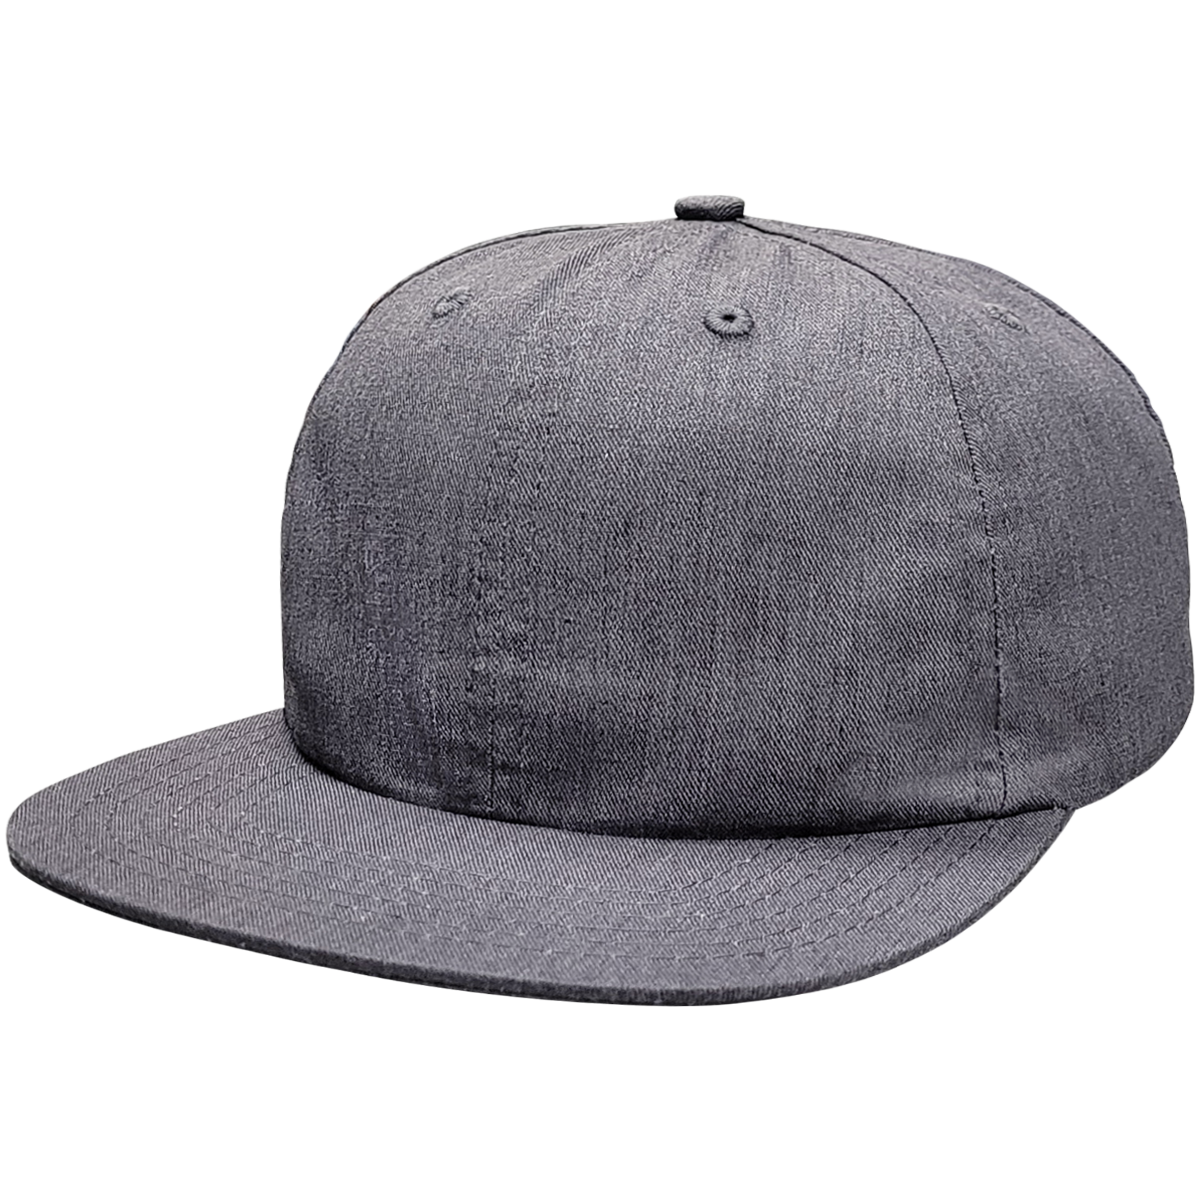 6 Panel Unstructured - FED65